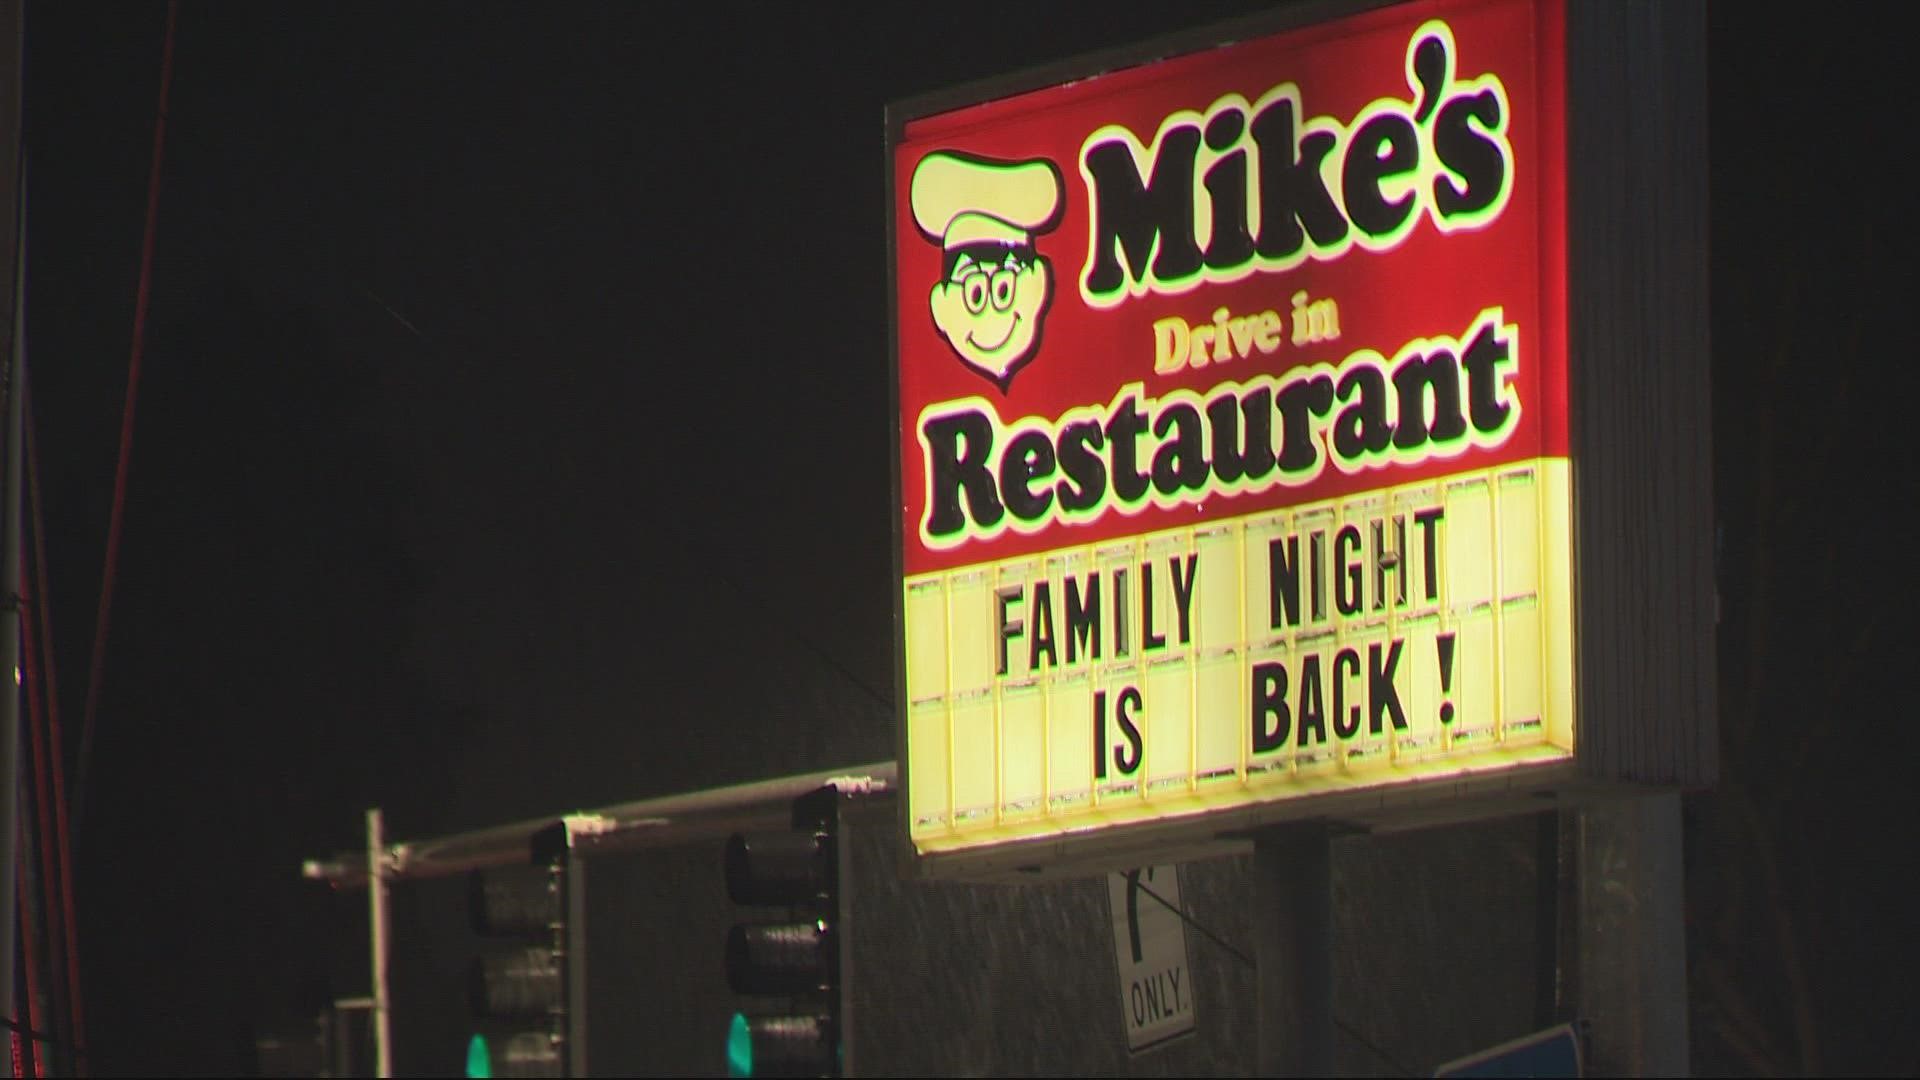 Mike's Drive-In is opening its first new location in 30 years in the building of an old Subway sandwich shop in Tigard. The owner is hopeful it will open by April.